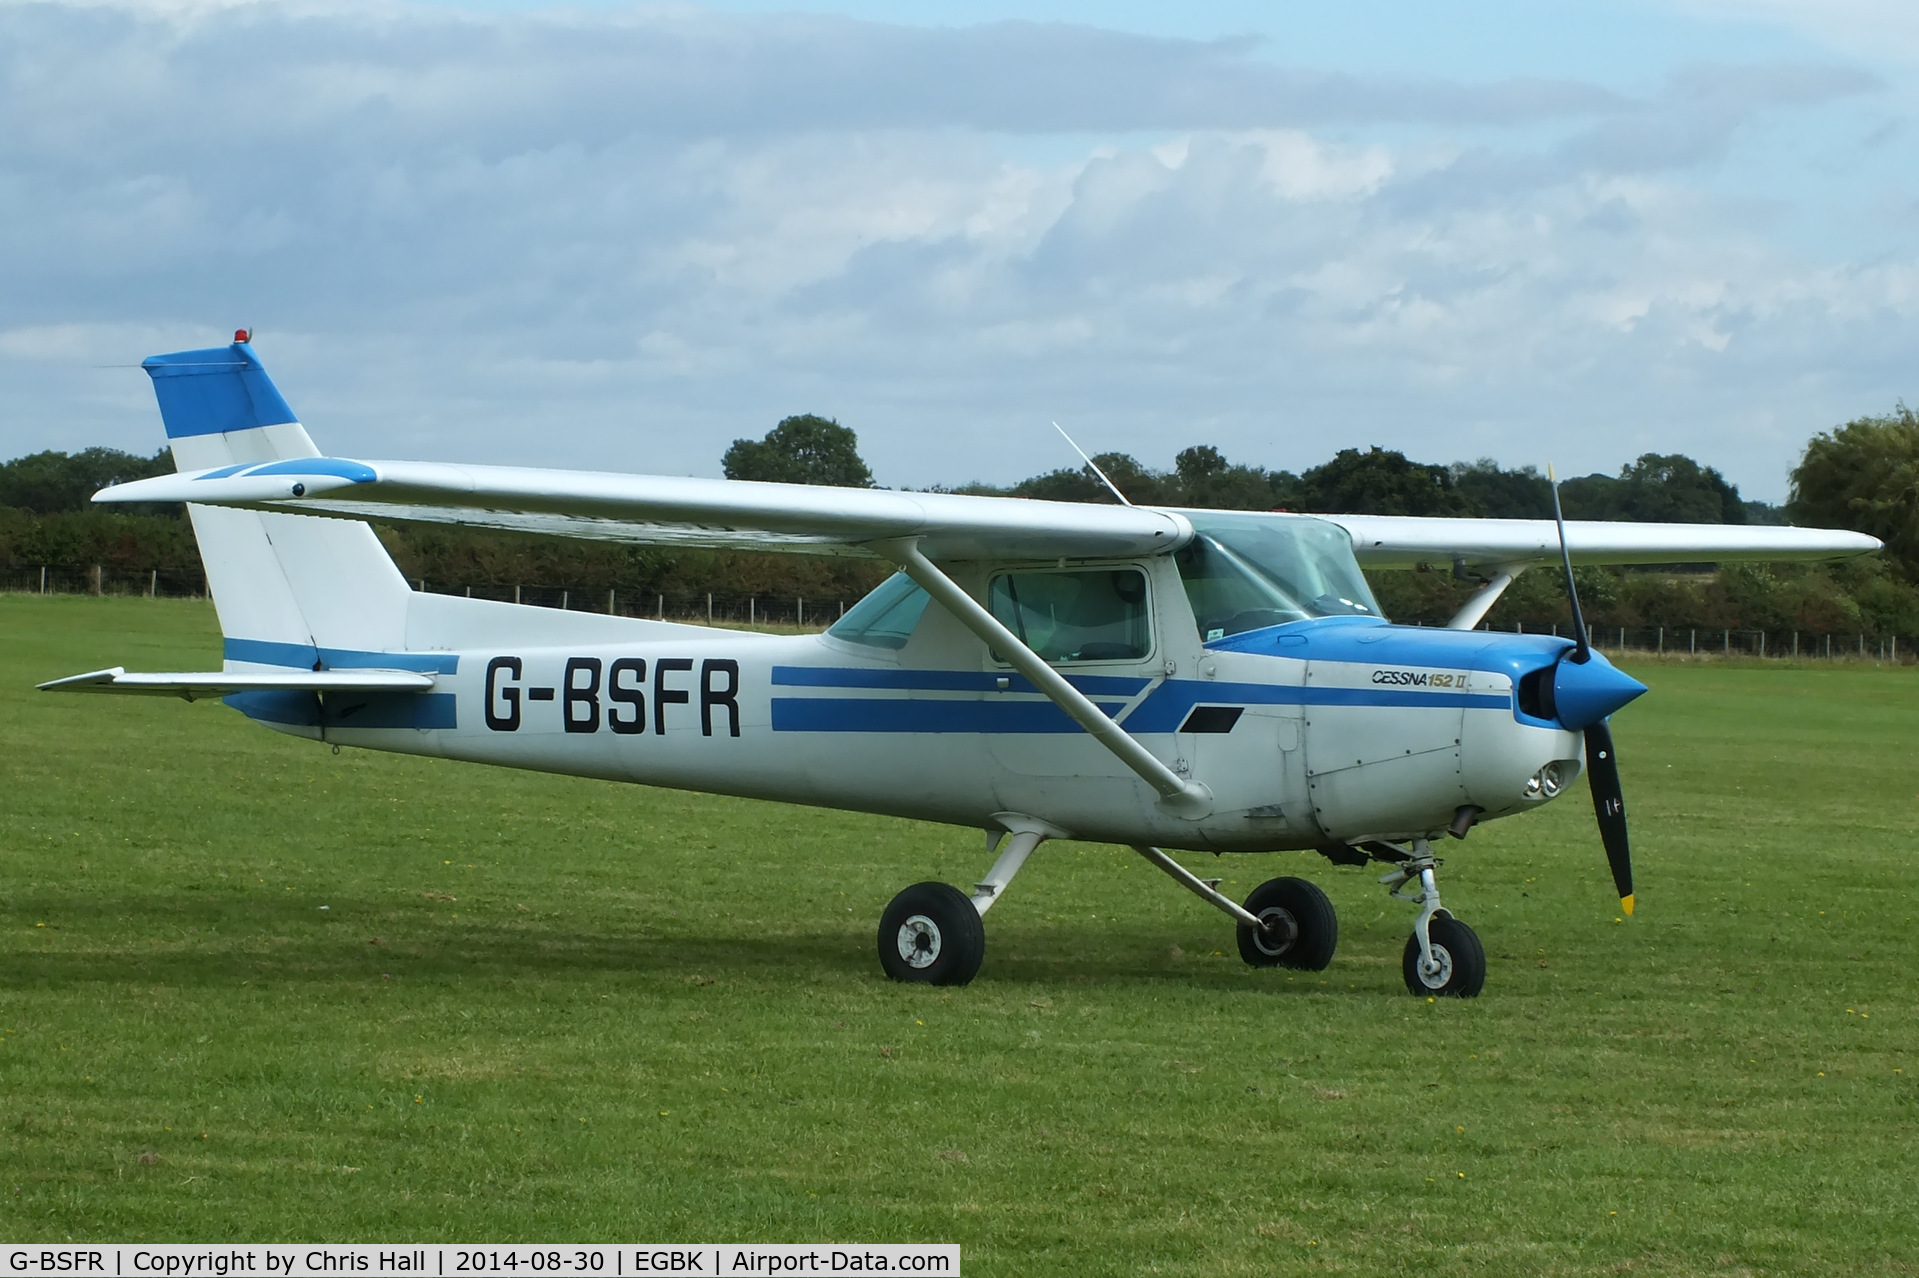 G-BSFR, 1979 Cessna 152 C/N 152-82268, at the LAA Rally 2014, Sywell